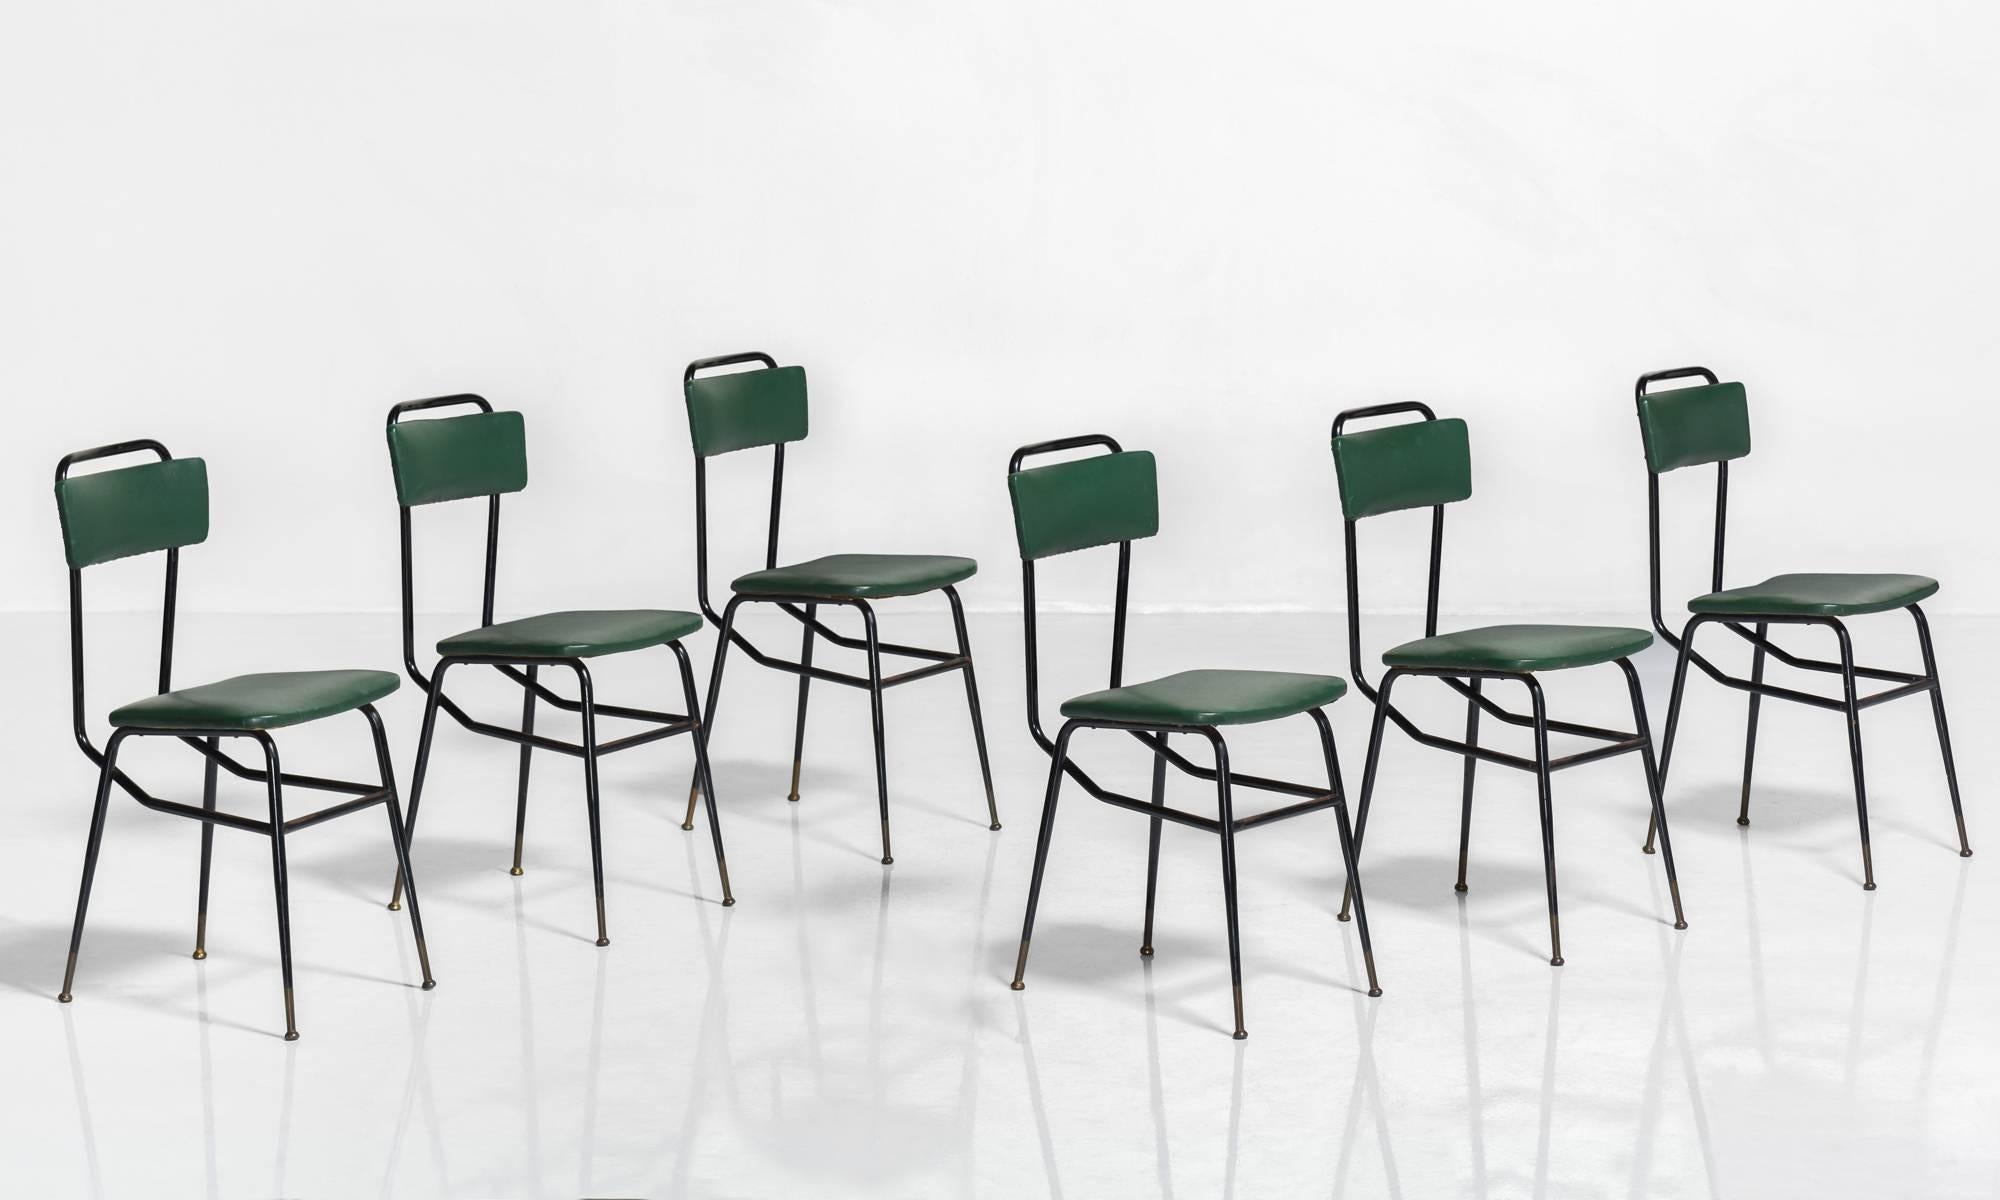 Set of six black metal and army green dining chairs, circa 1950.

Original vinyl upholstery with black metal frame.